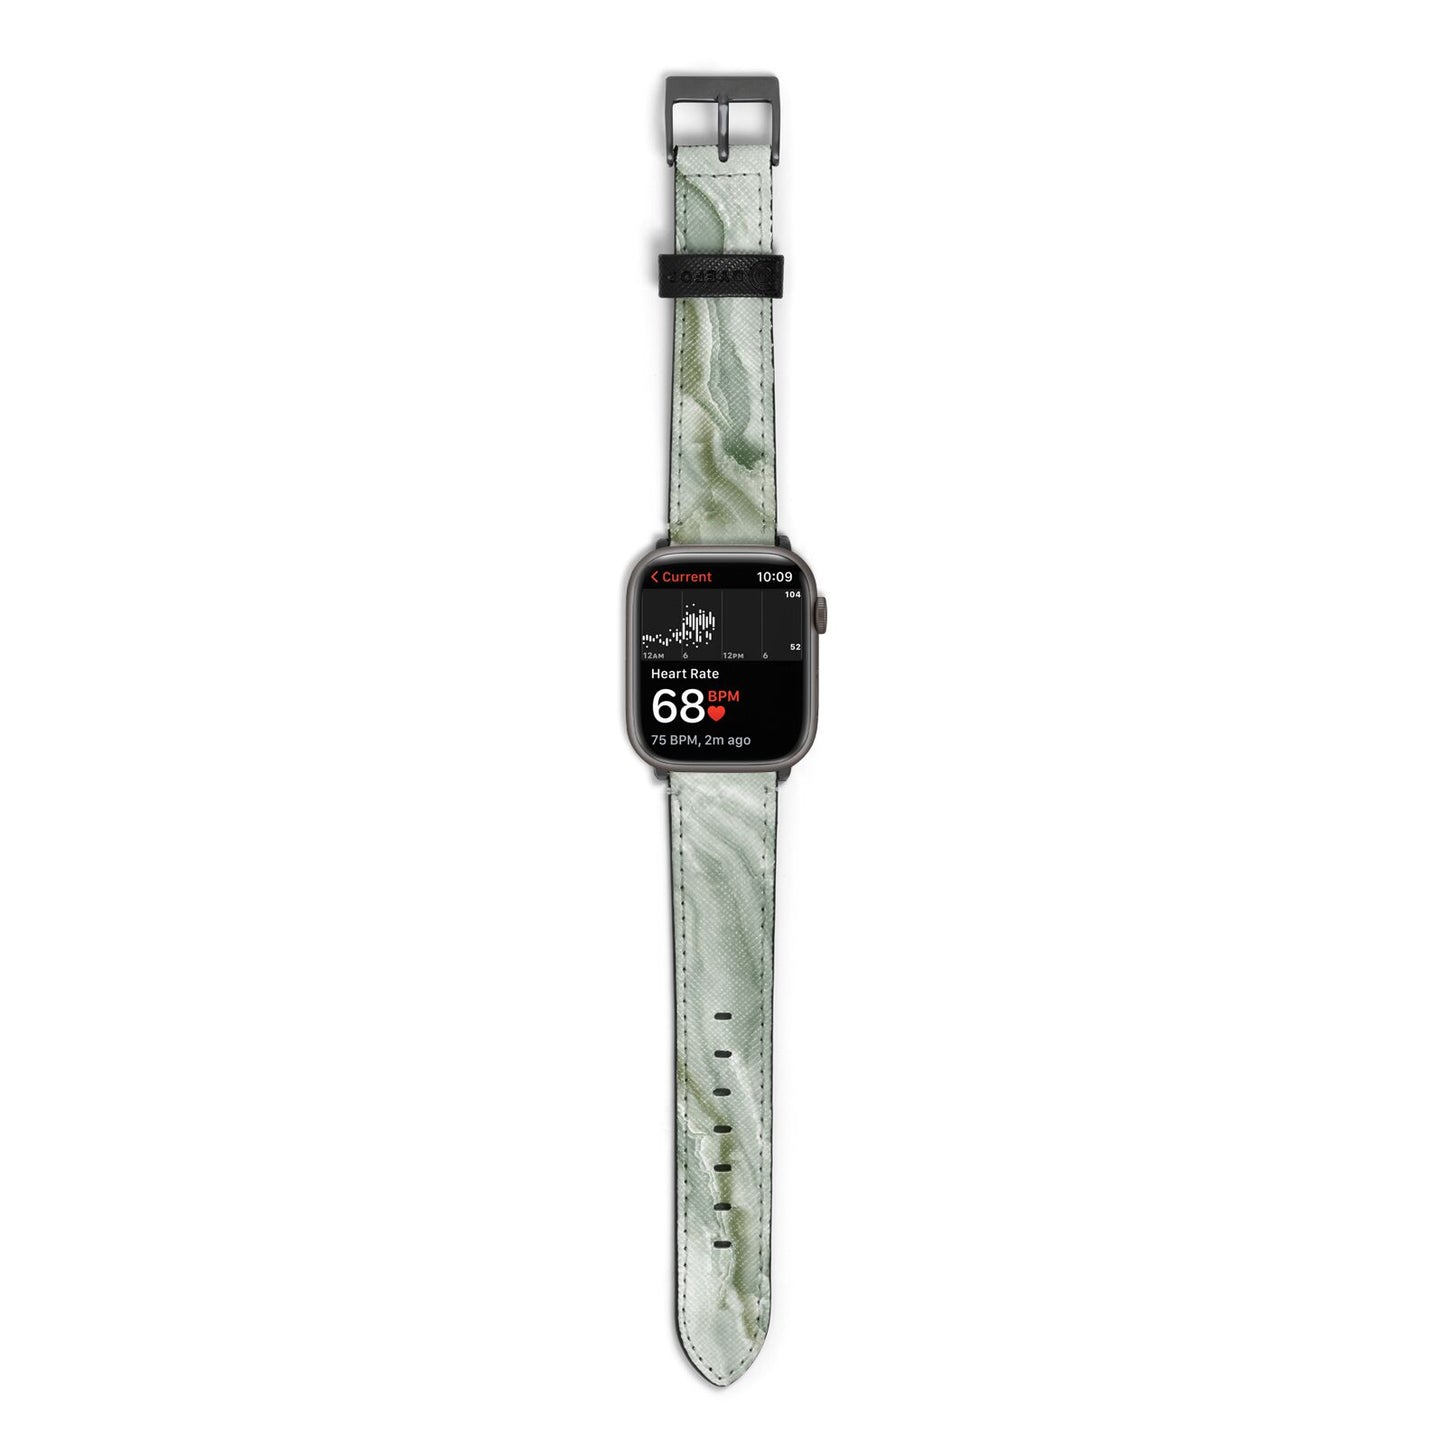 Pistachio Green Marble Apple Watch Strap Size 38mm with Space Grey Hardware